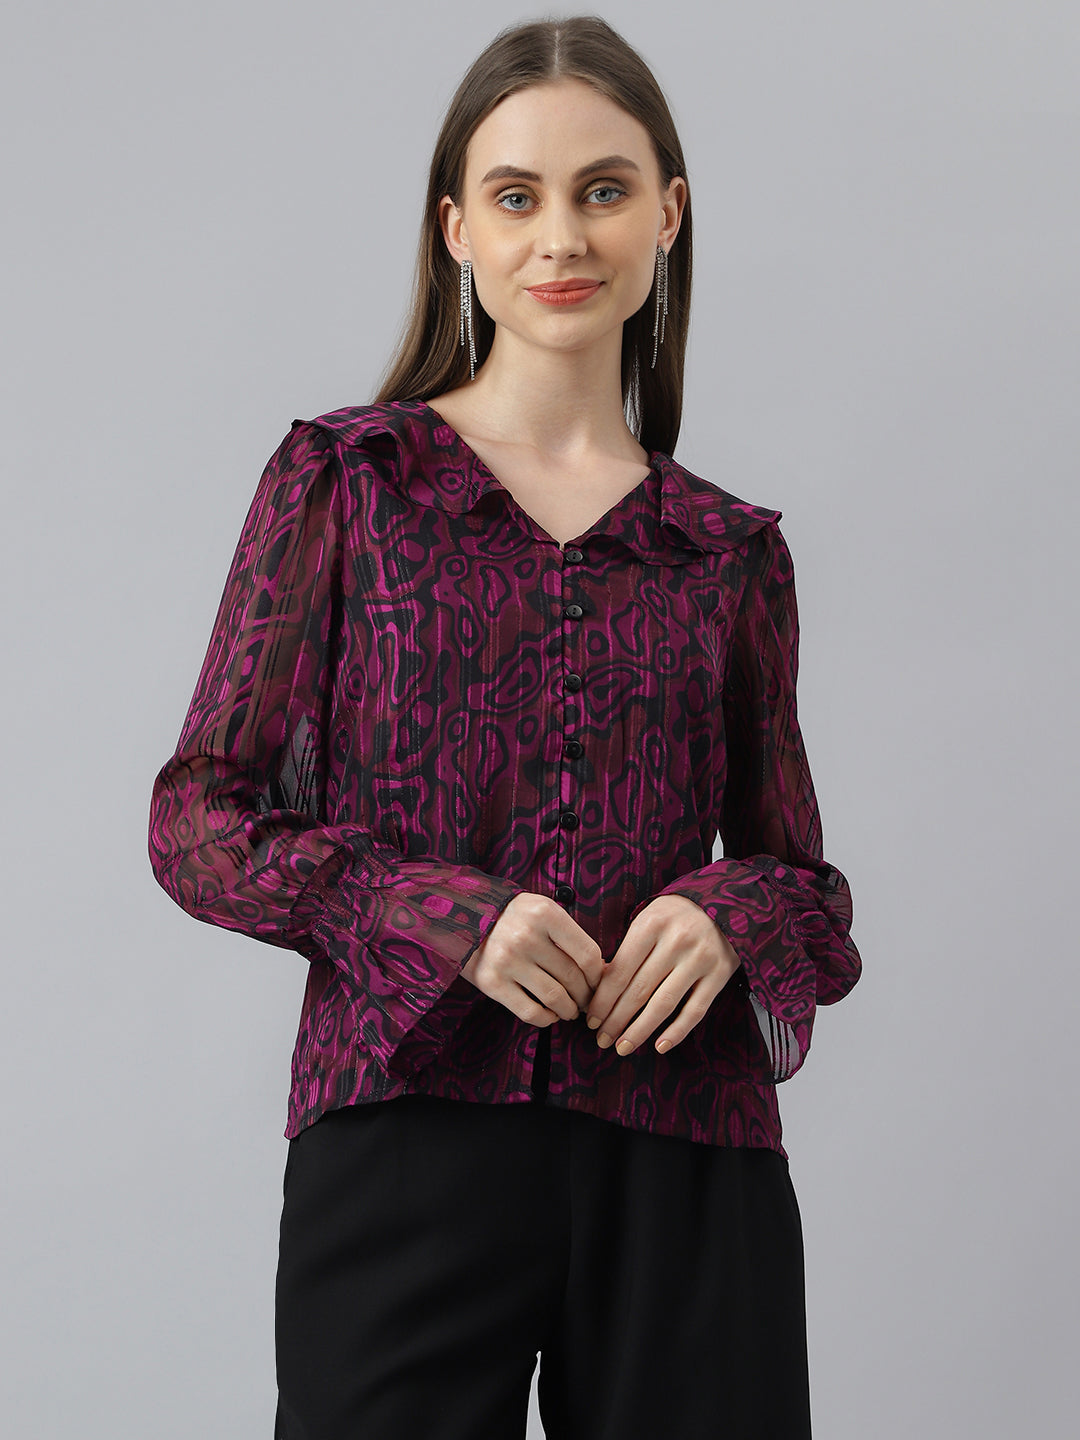 Wine Full Sleeve V-Neck Printed Women Blouse Top for Casual